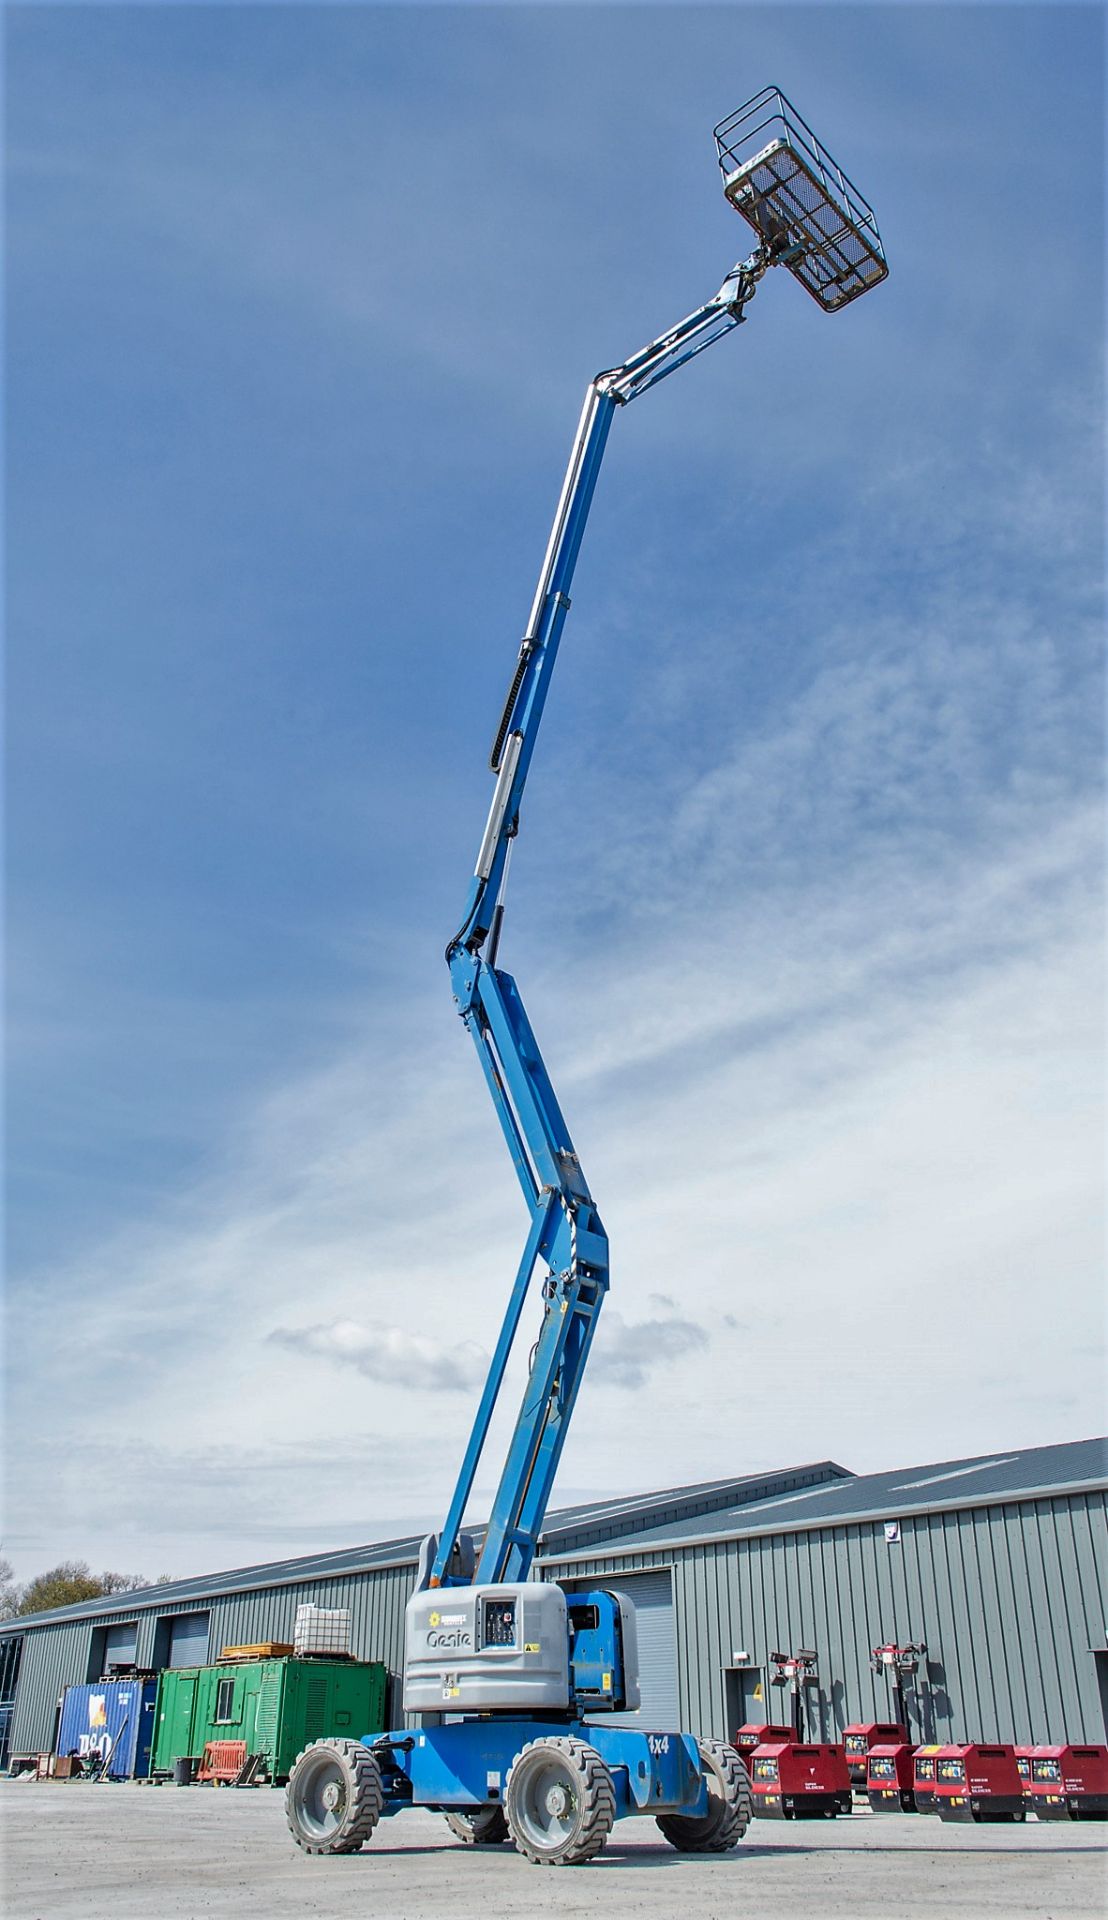 Genie Z60/34 diesel driven articulated boom access platform Year: 2014 S/N: 13399 Recorded Hours: - Image 9 of 16